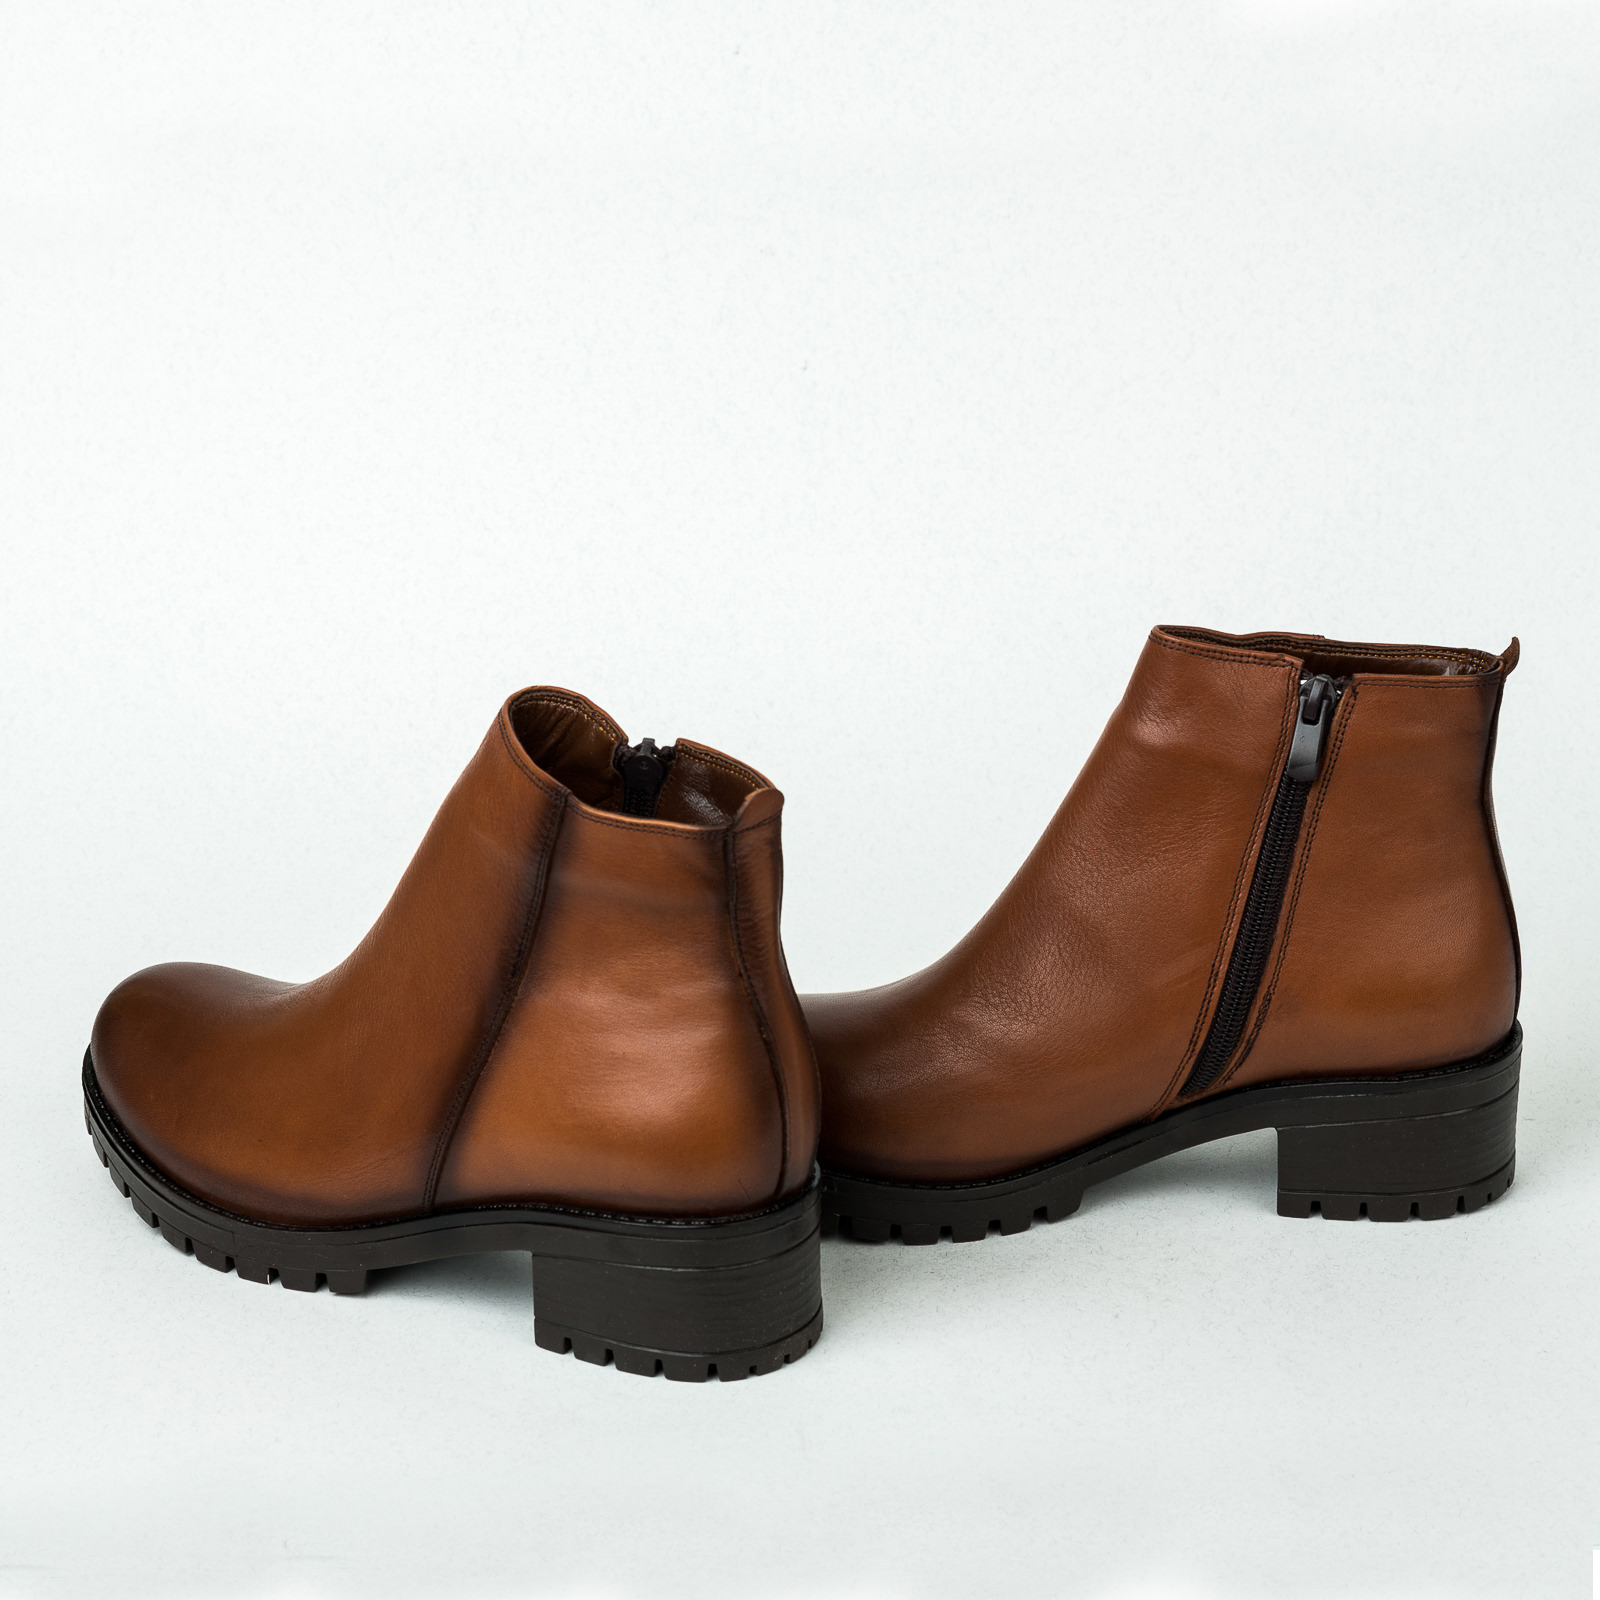 Leather ankle boots B236 - BROWN